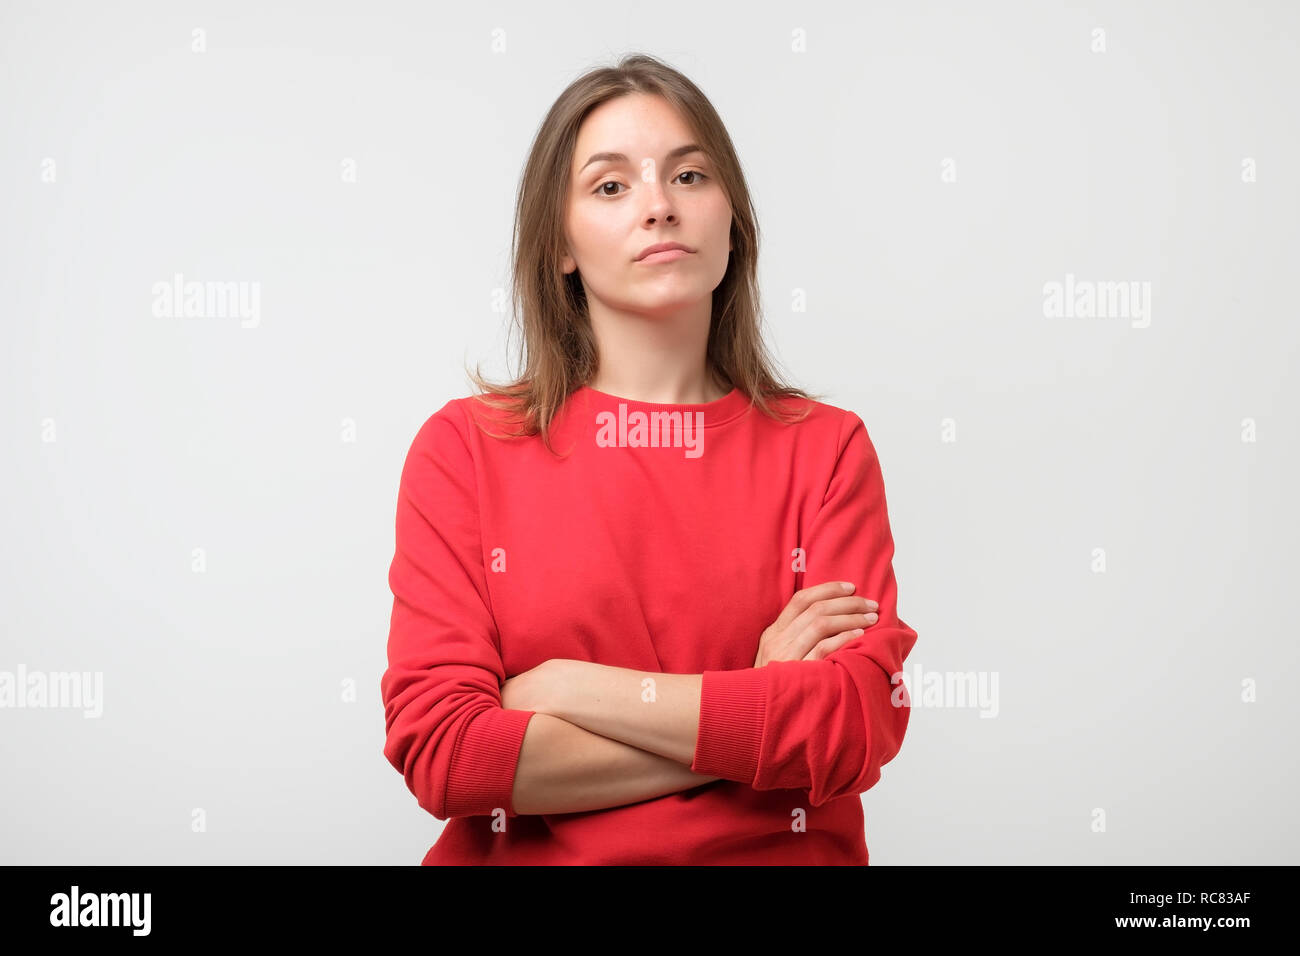 Young serious angry woman in red sweater on a white background Stock Photo